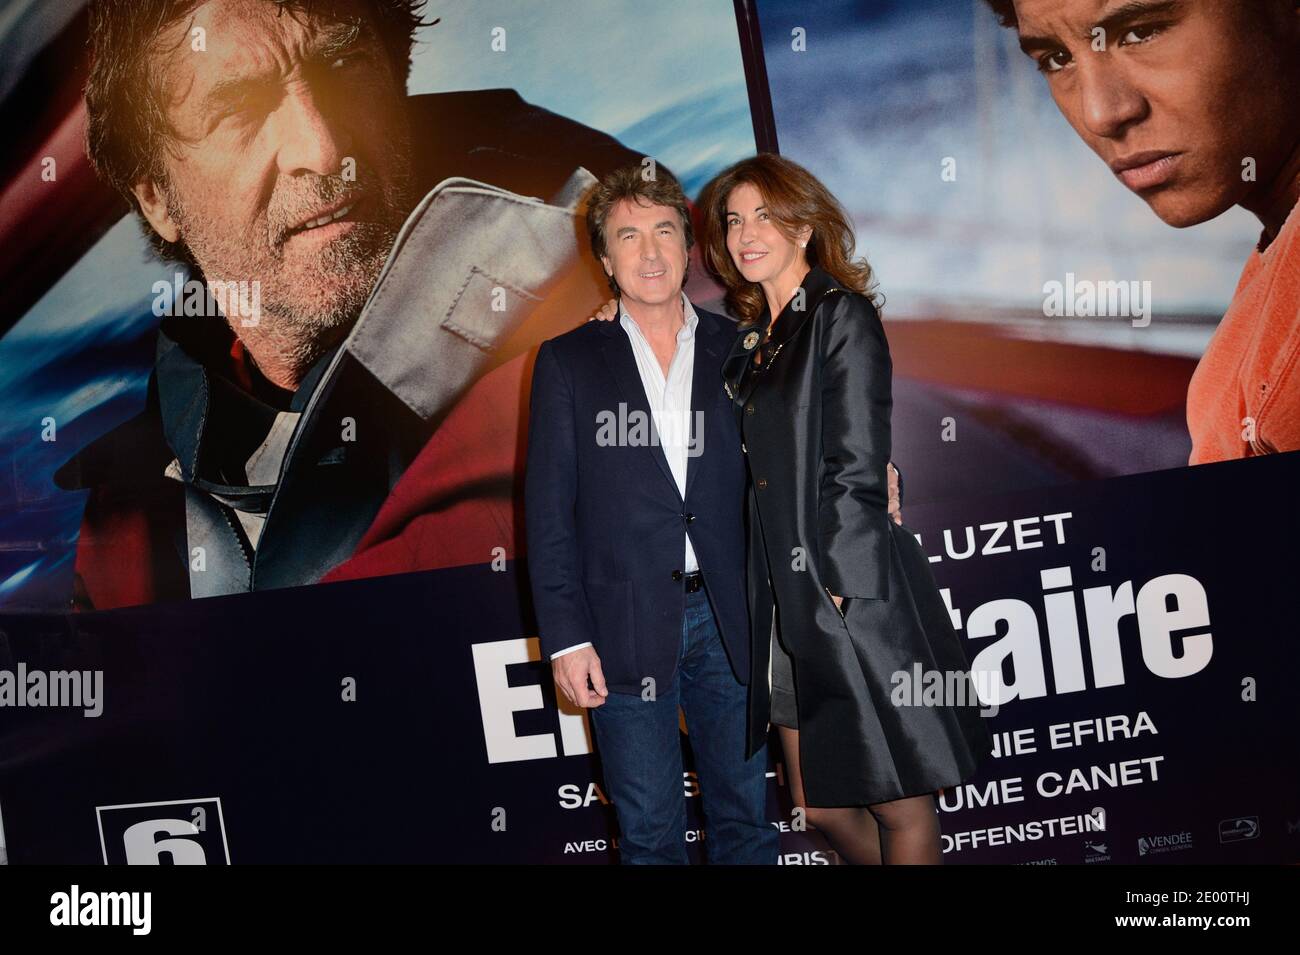 Francois Cluzet and his wife Narjiss attending the premiere of the film En Solitaire held at the Cinema Gaumont Opera in Paris, France on November 4, 2013. Photo by Nicolas Briquet/ABACAPRESS.COM Stock Photo